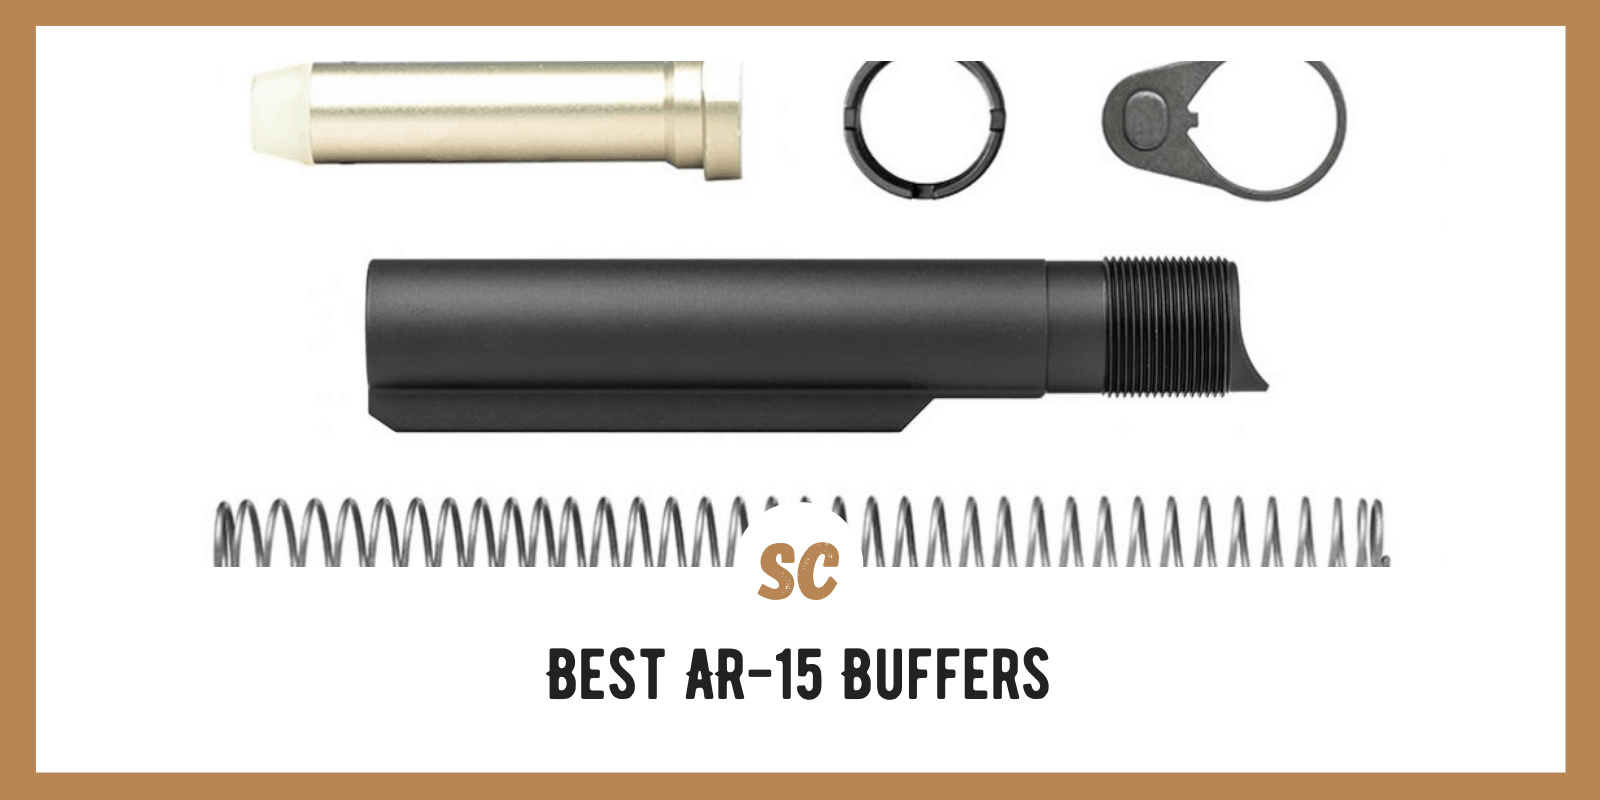 Ins and Outs of the Best AR-15 Buffers: My Experiences